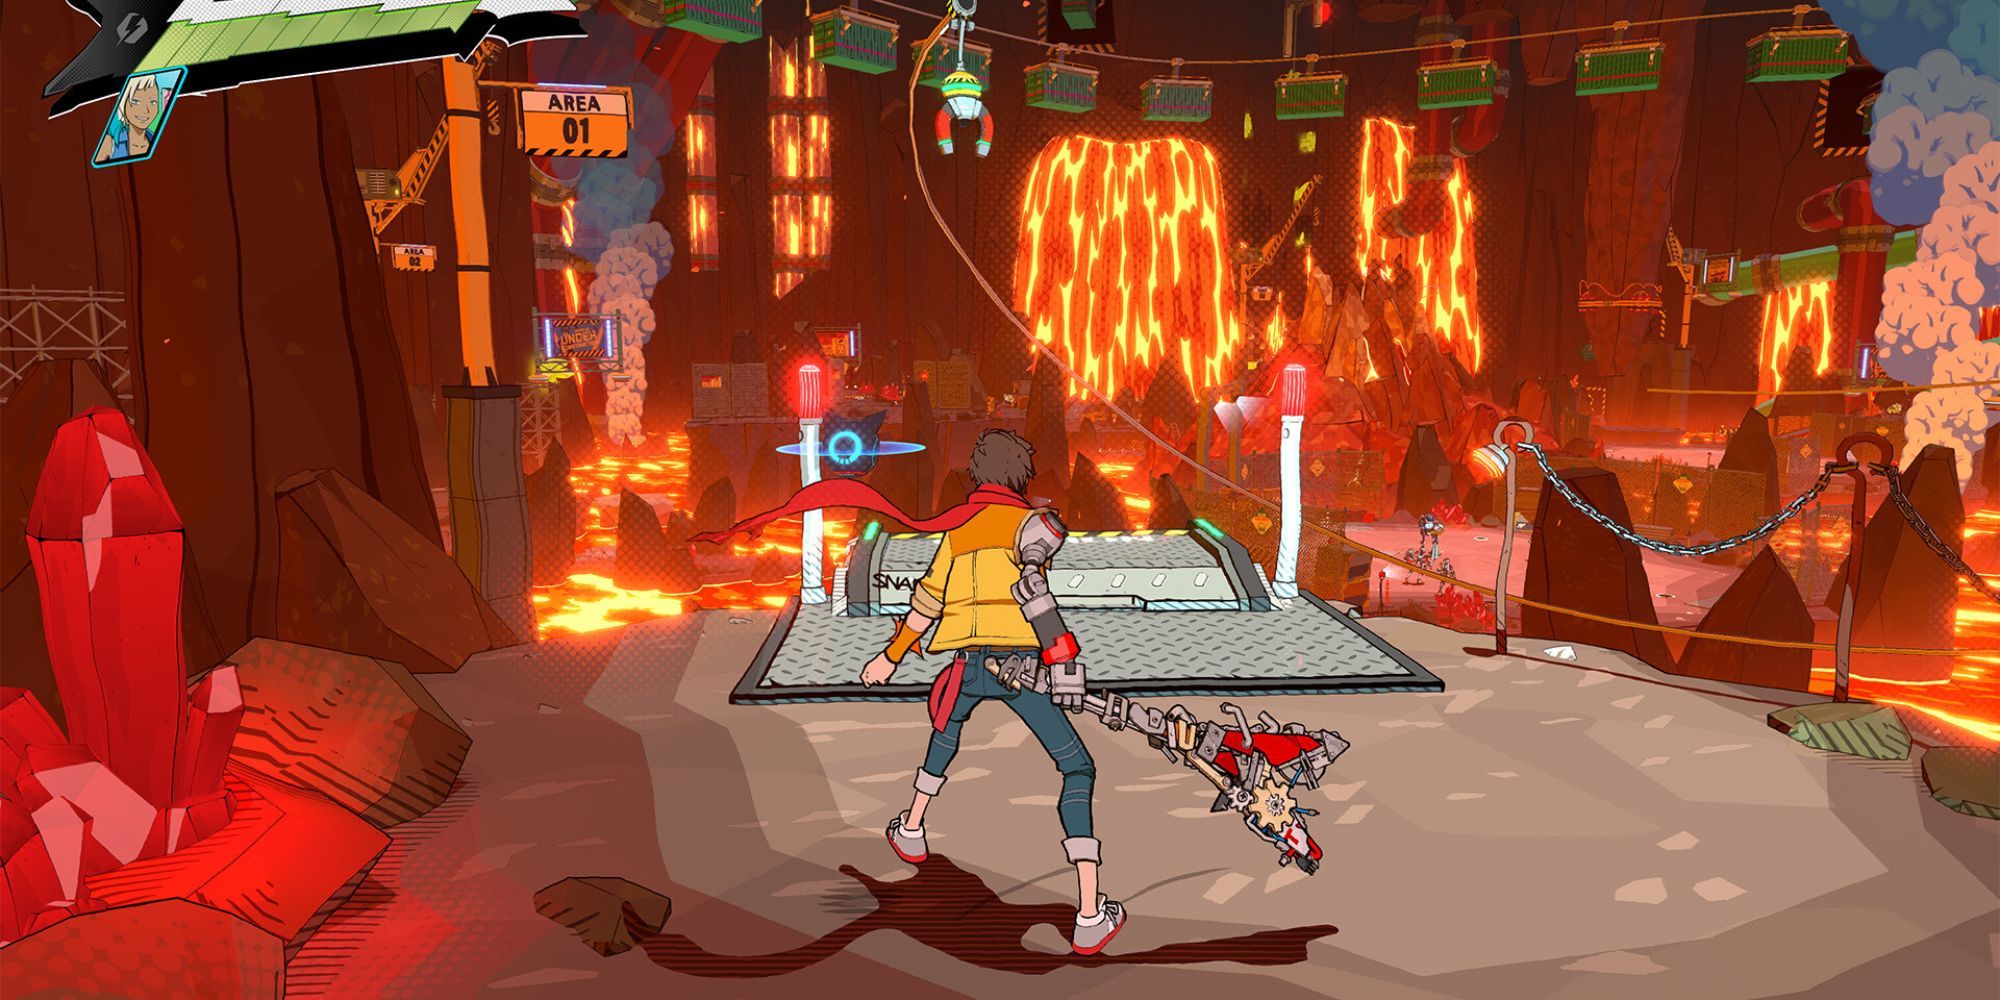 A third-person view of protagonist Chai wielding a grungy, scrappy guitar in a lava-flowing arena.